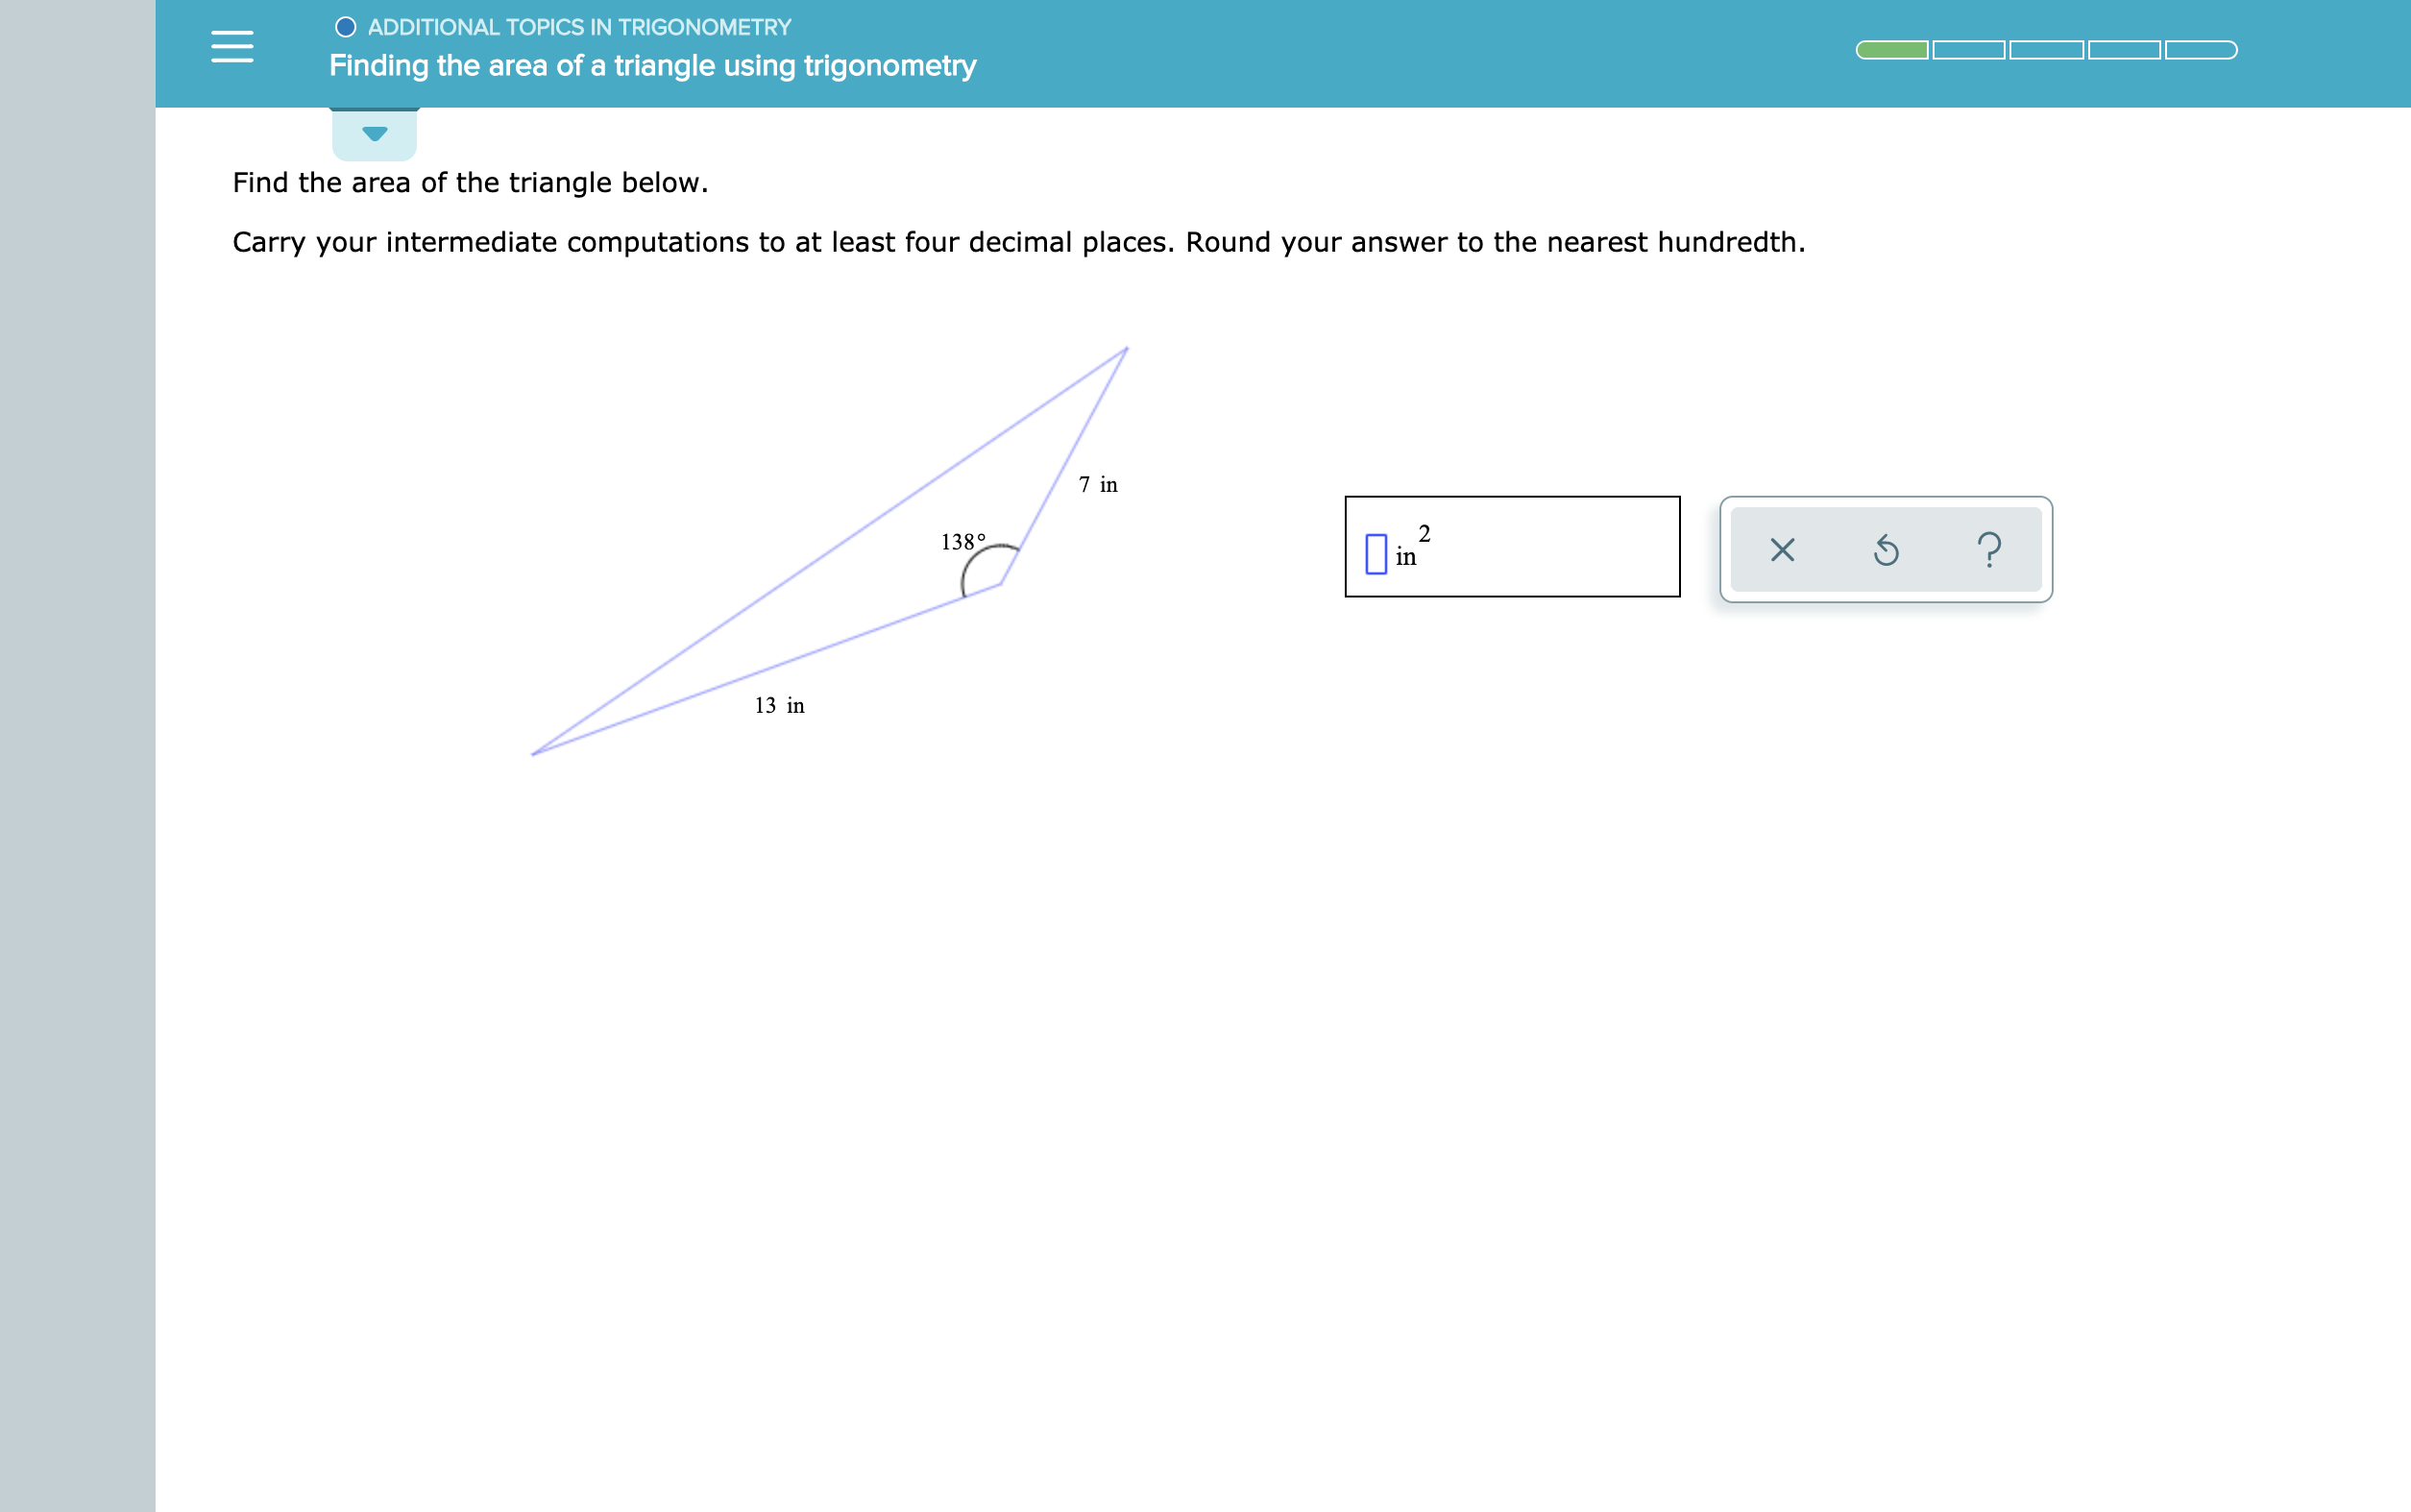 O ADDITIONAL TOPICS IN TRIGONOMETRY
Finding the area of a triangle using trigonometry
Find the area of the triangle below
Carry your intermediate computations to at least four decimal places. Round your answer to the nearest hundredth
7 in
2
?
138°
in
13 in
